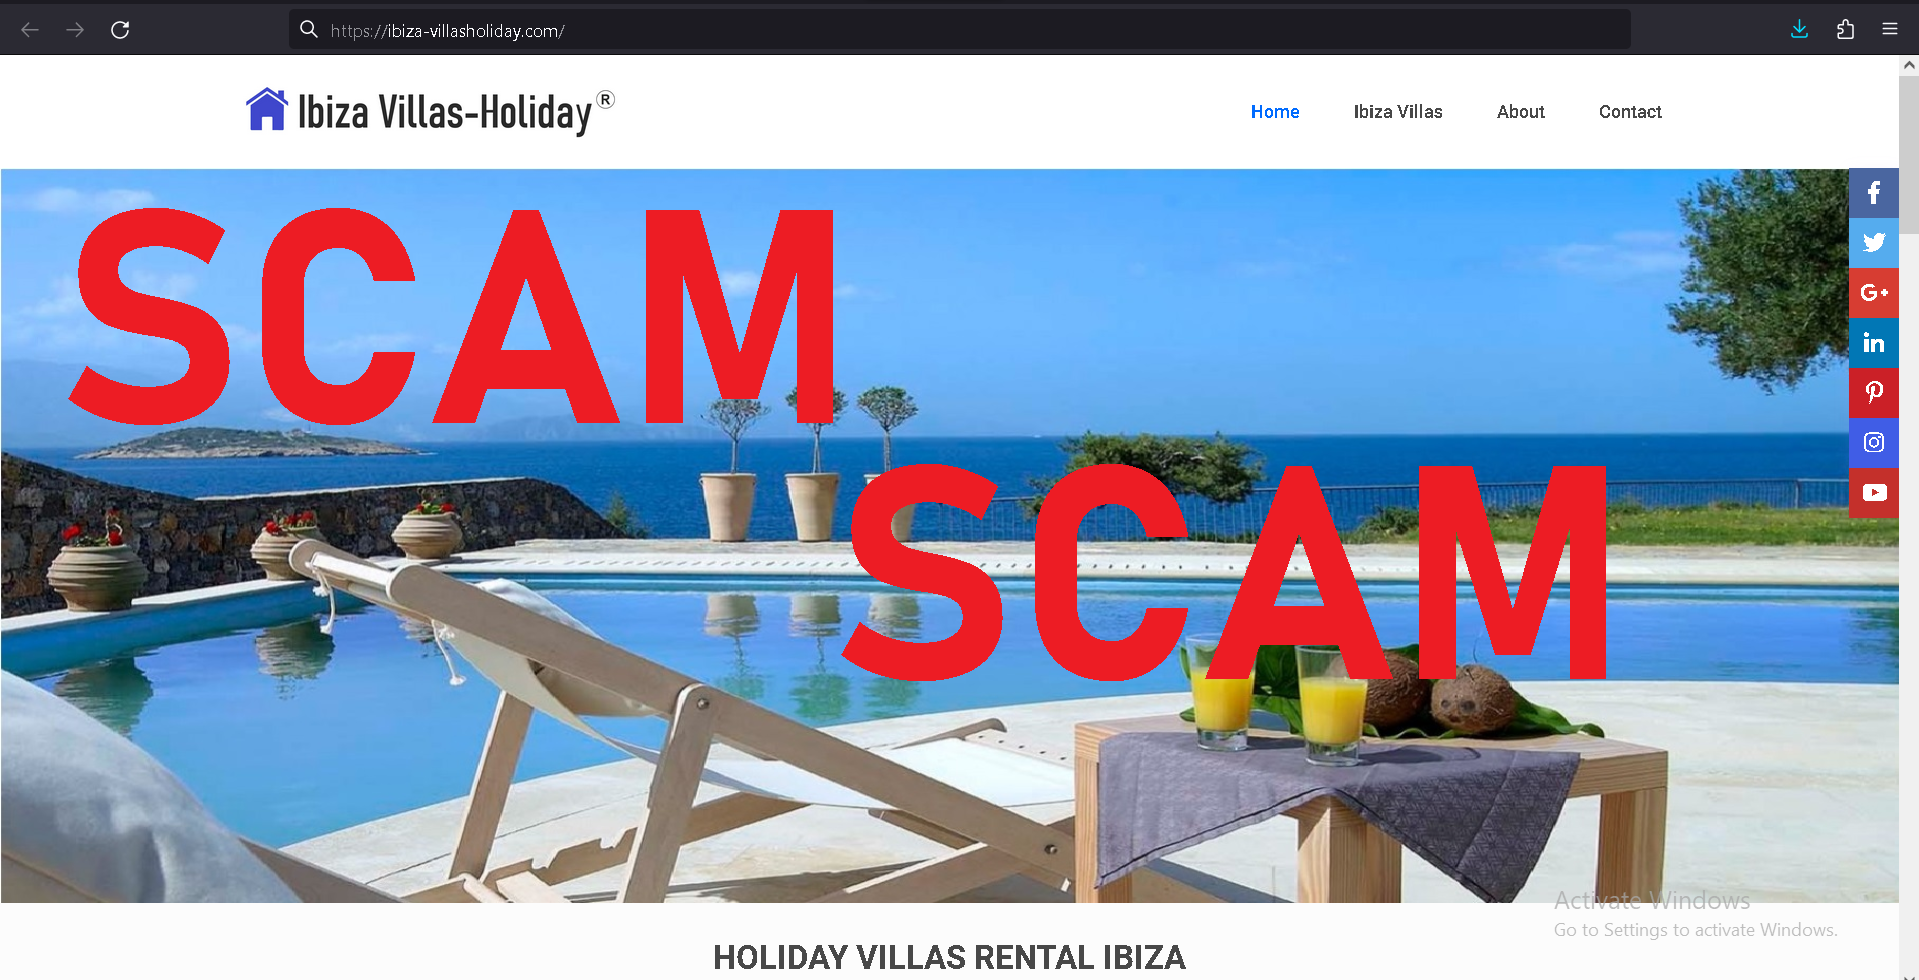 You are currently viewing Fraudulent website: ibiza-villasholiday.com SCAM SCAM